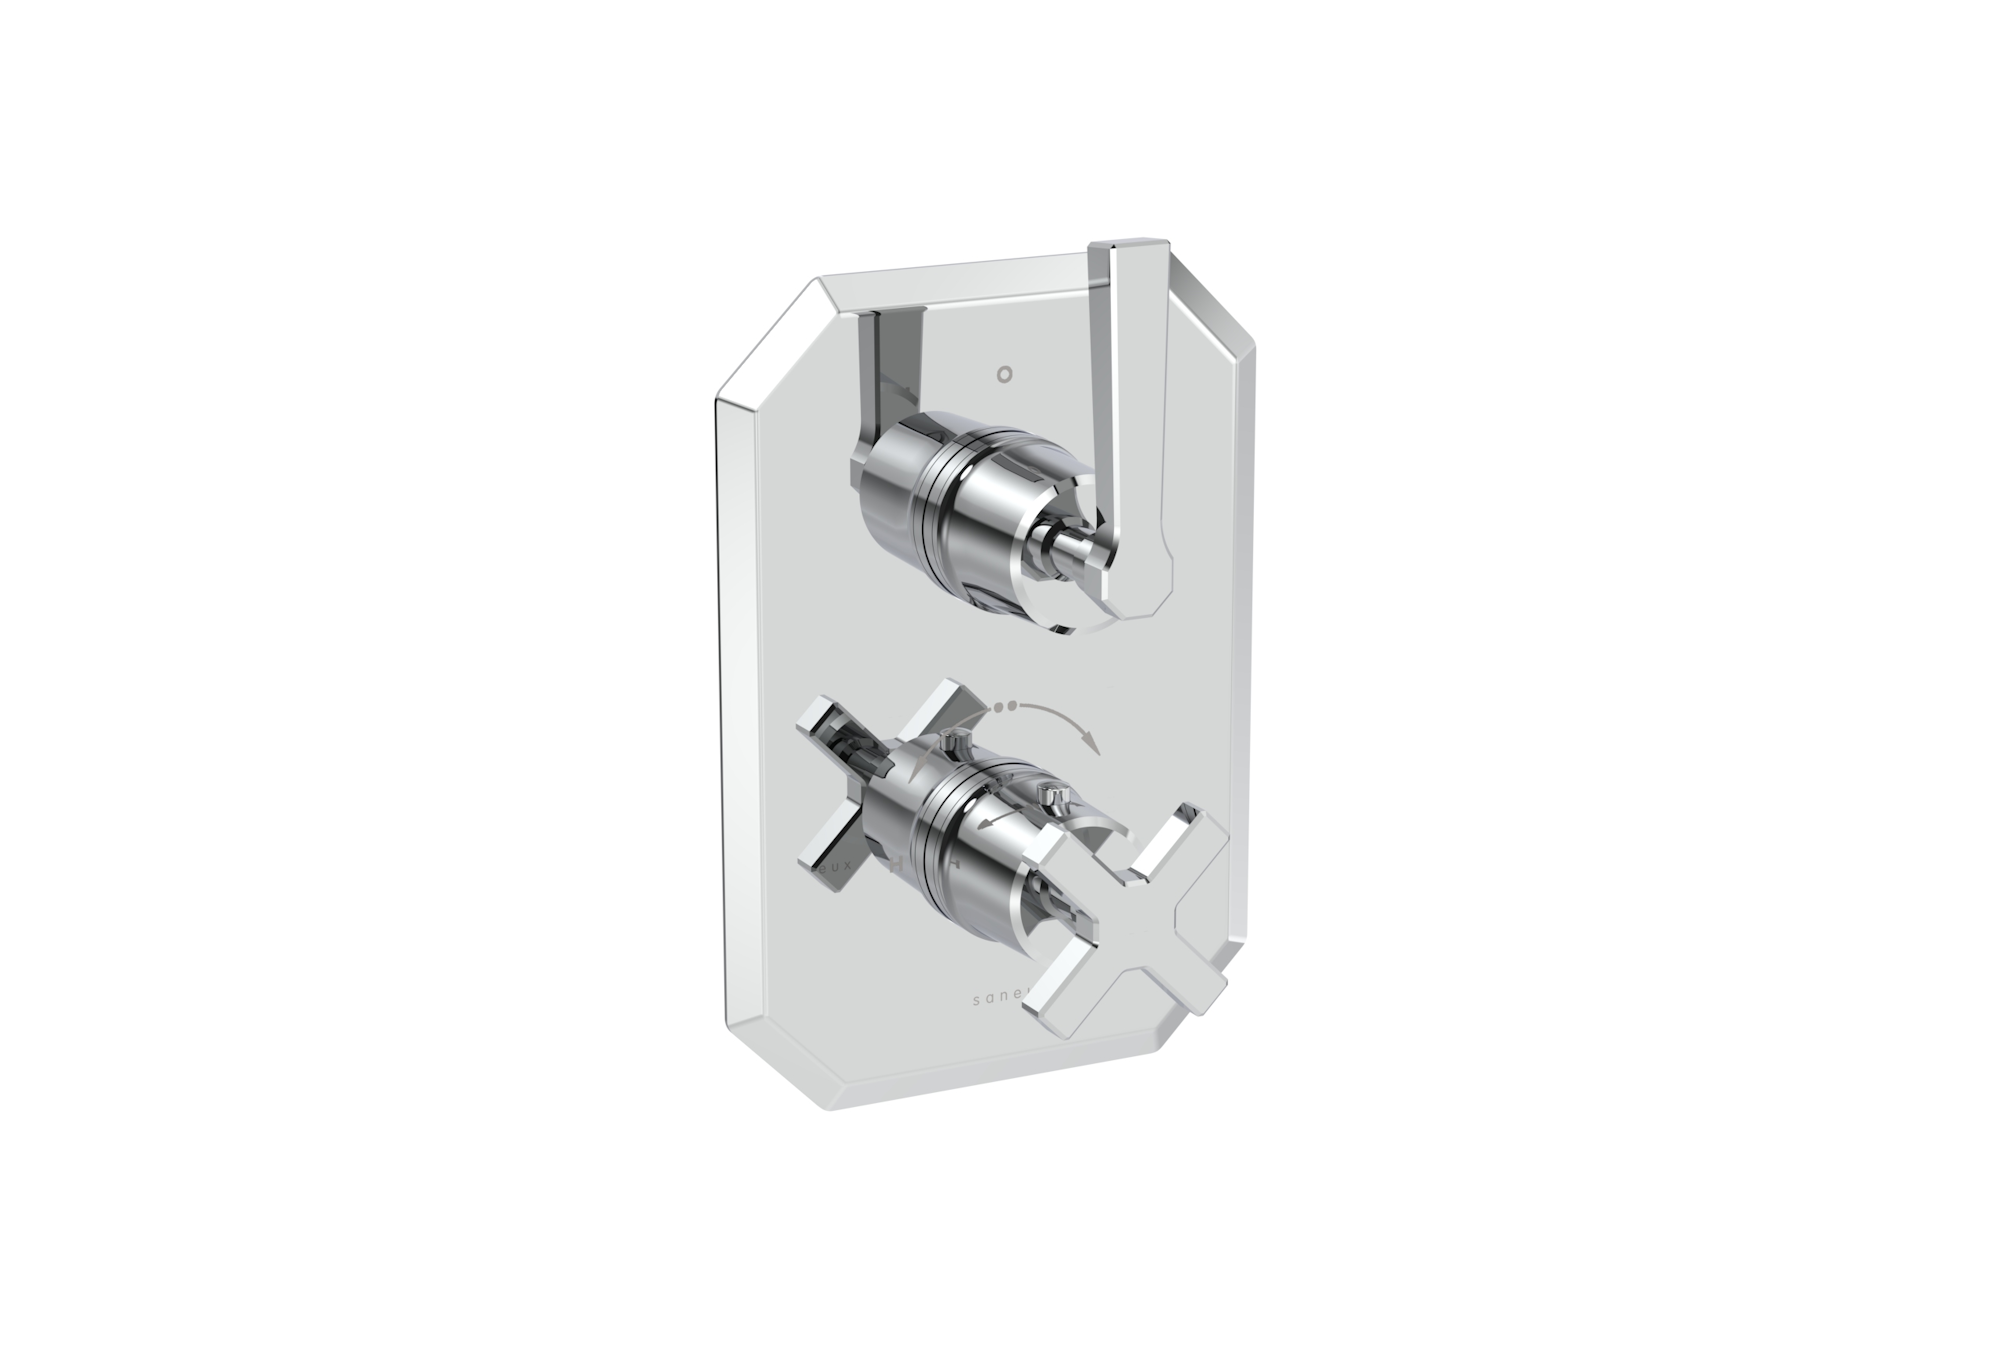 CROMWELL 1 way thermostatic shower valve kit with lever handles - Chrome